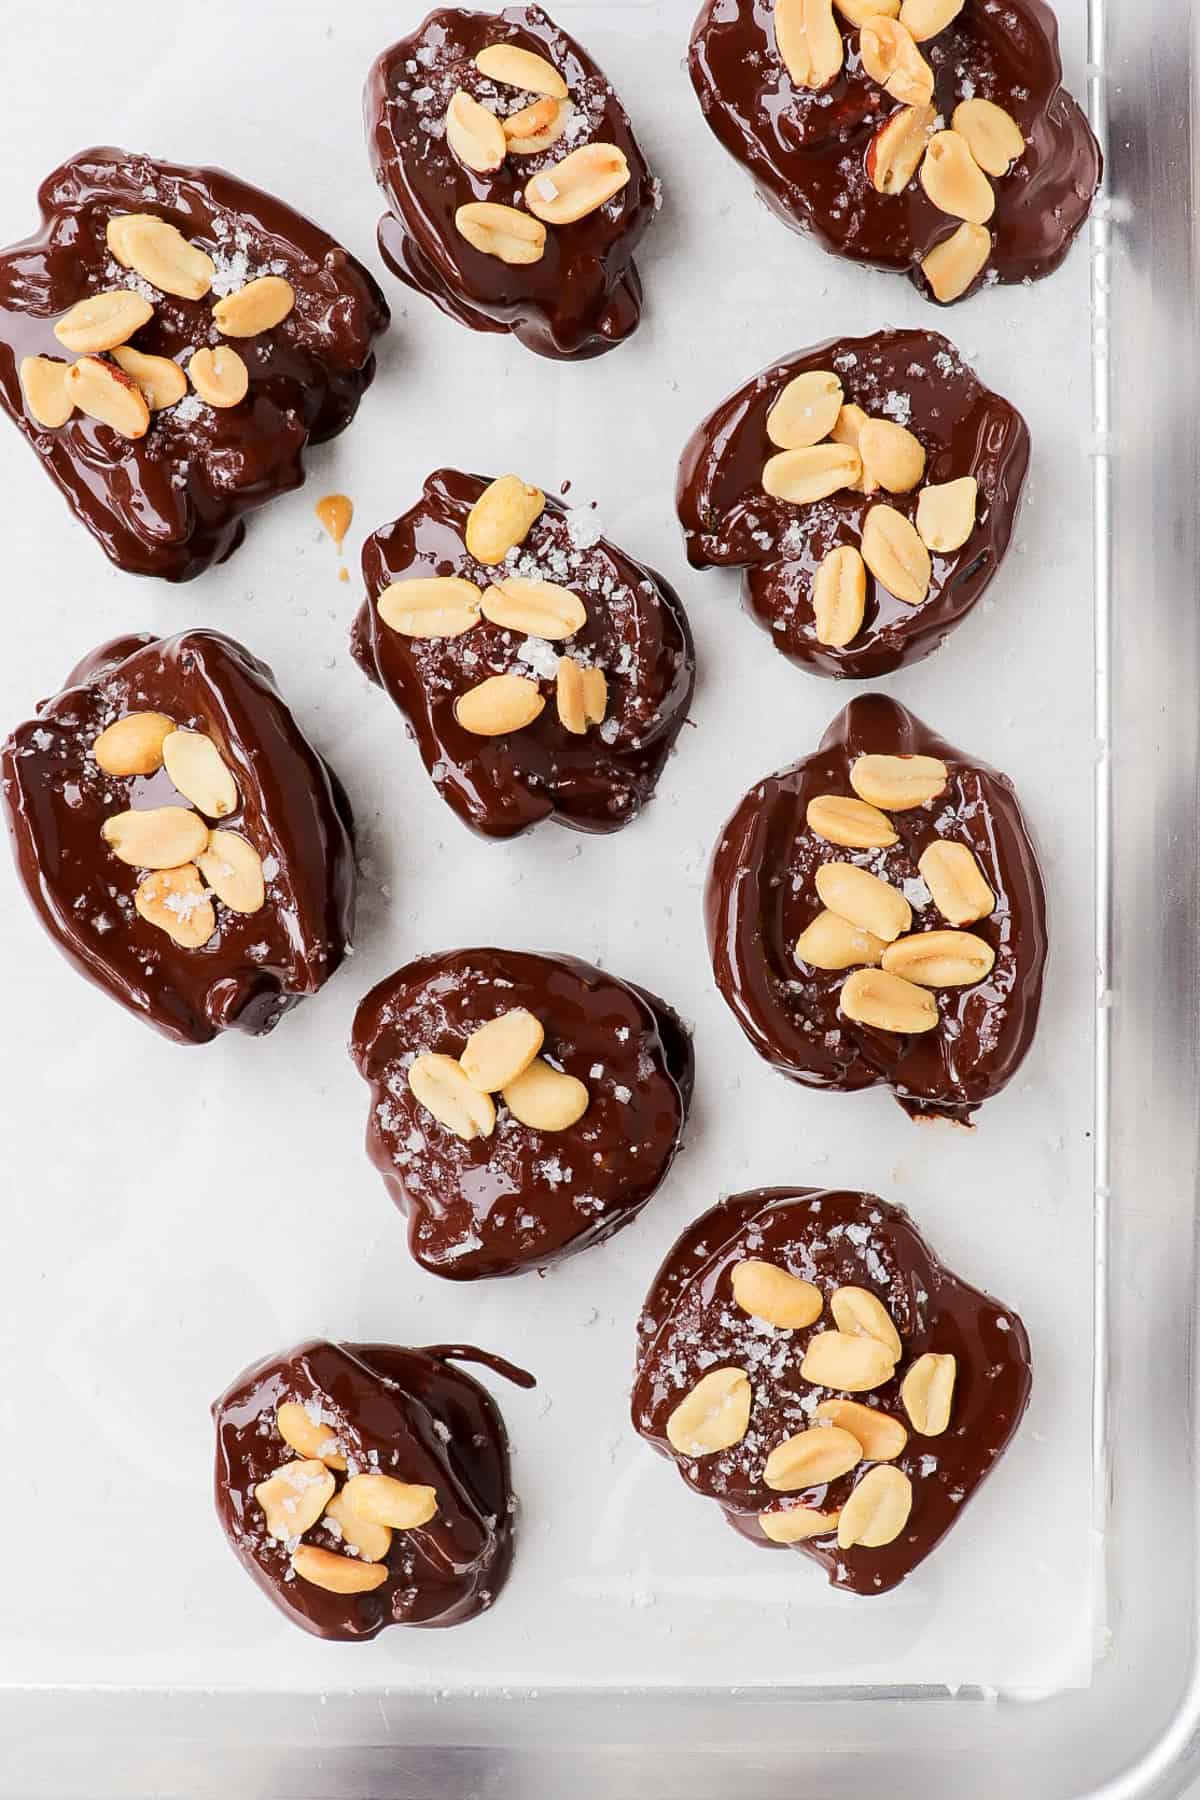 Melted chocolate covered dates with peanuts.